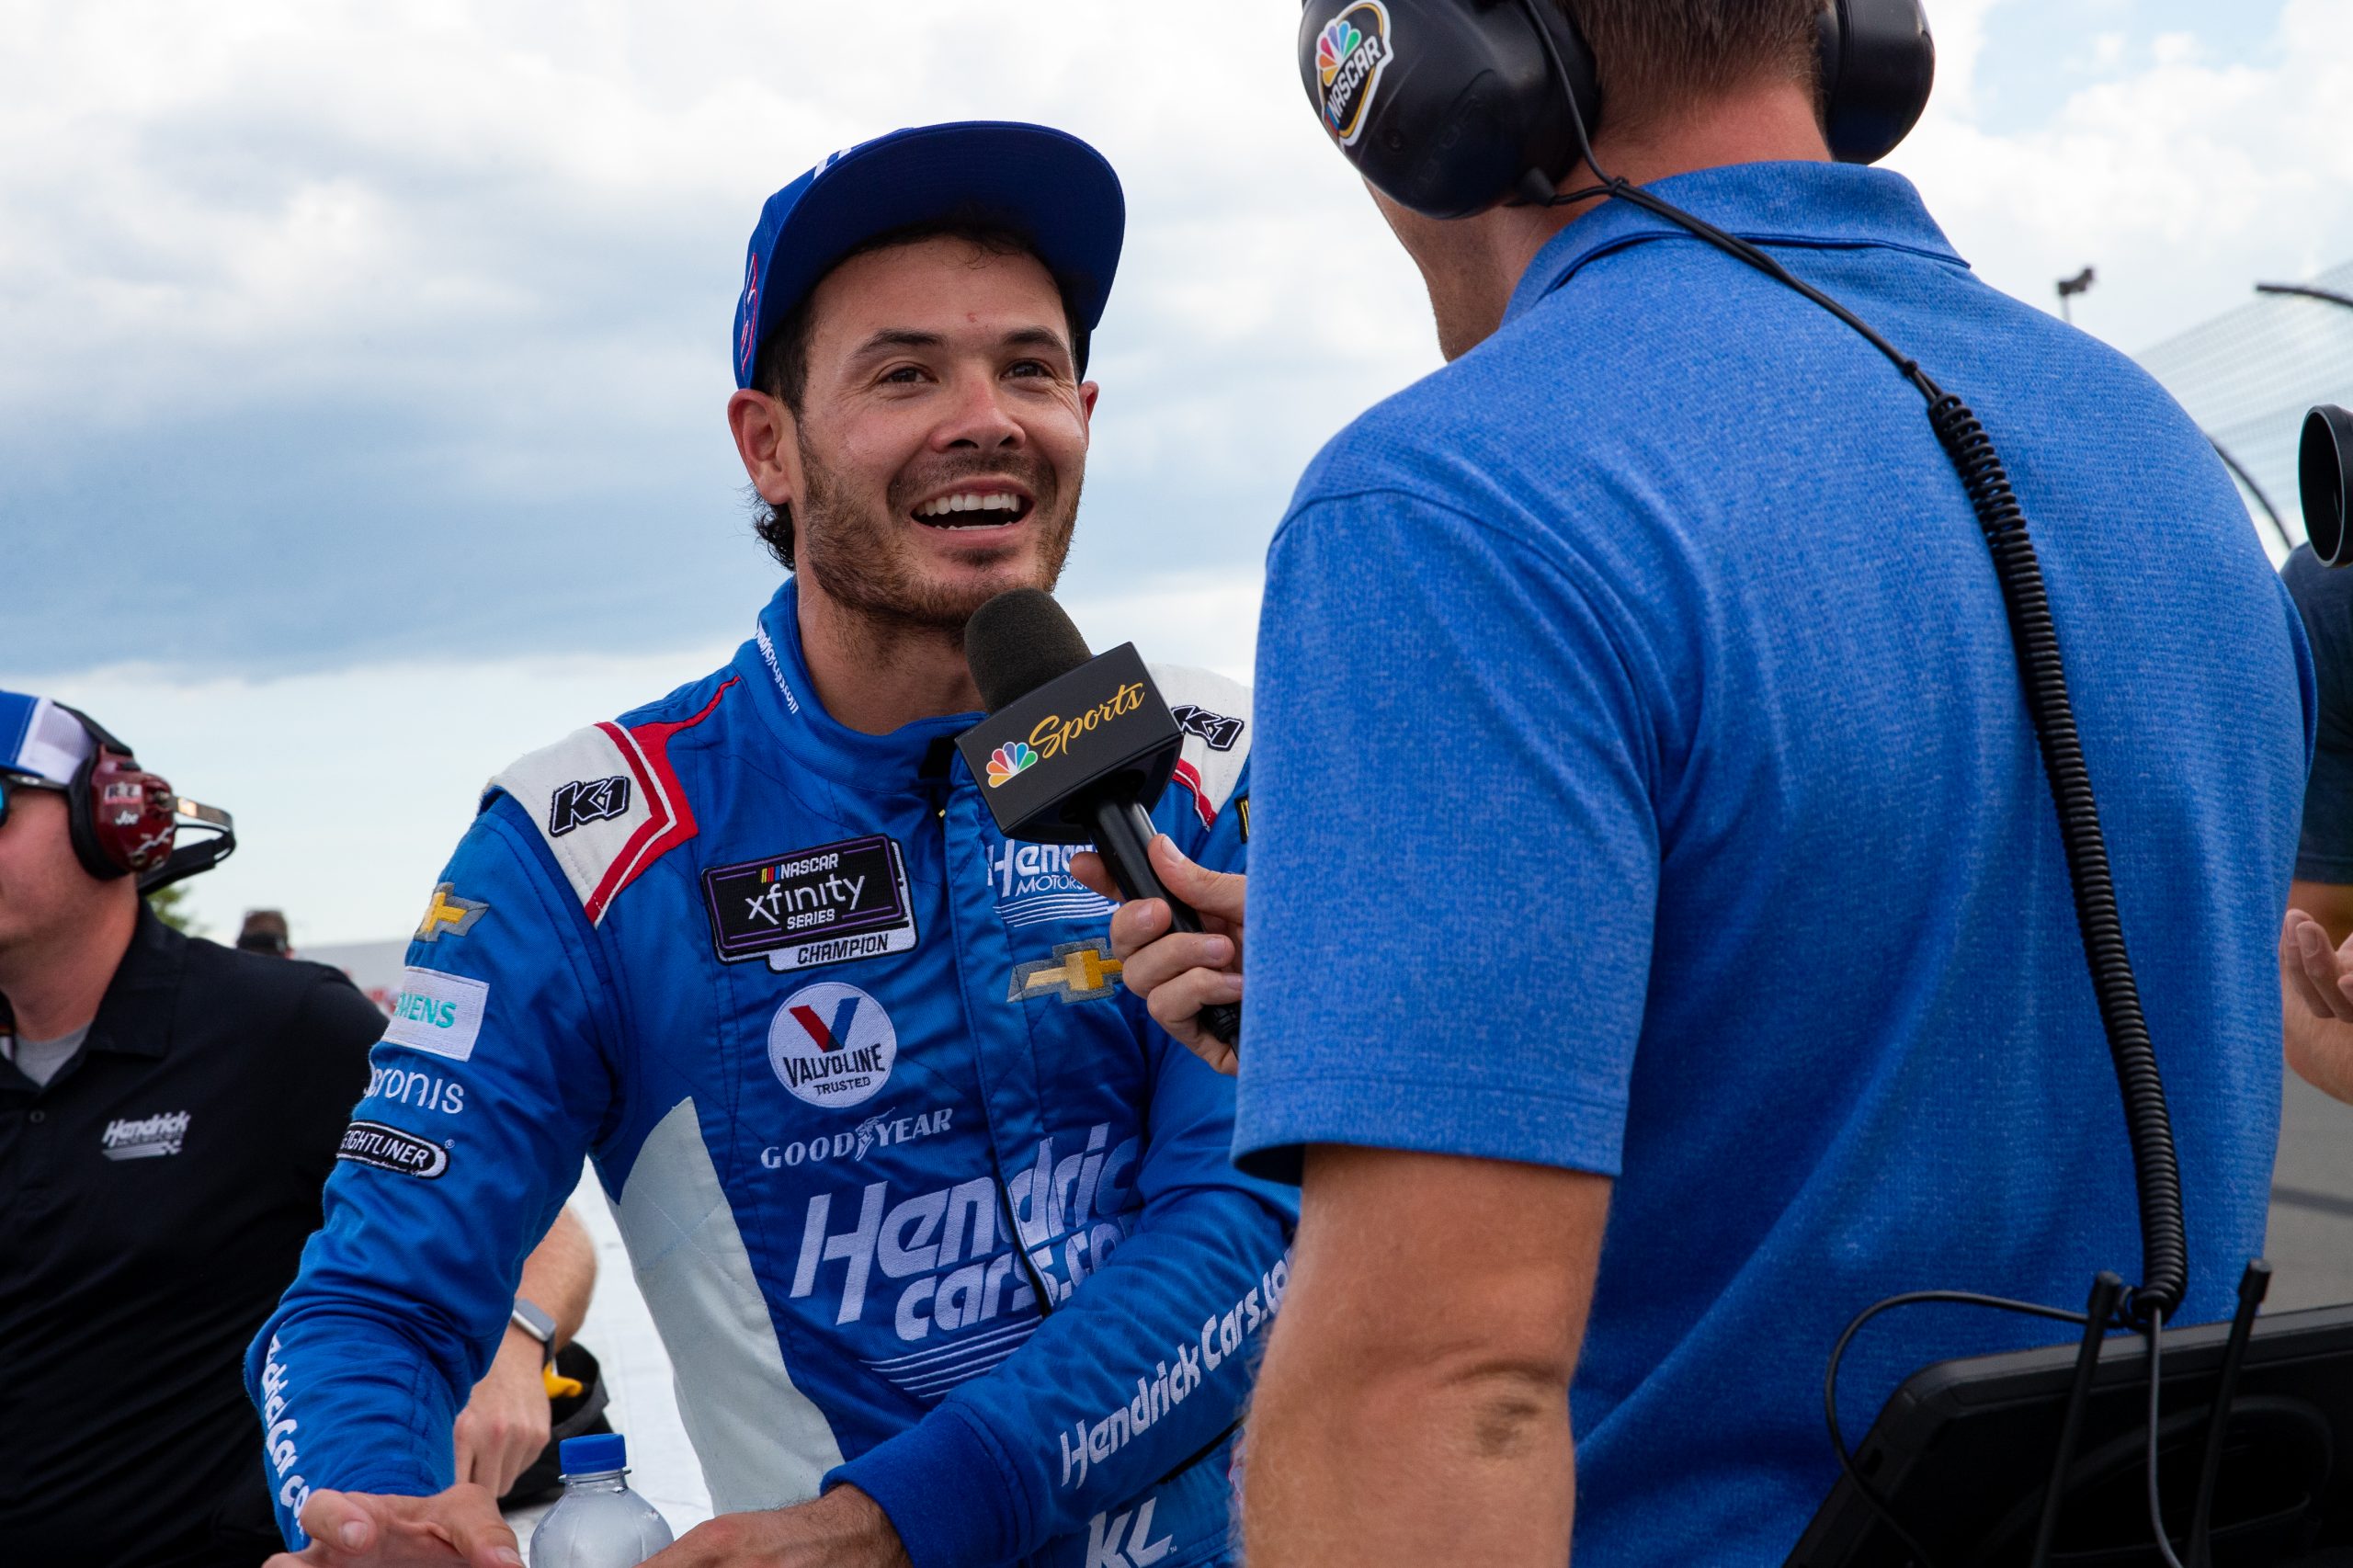 Kyle Larson looks for another winning afternoon in Watkins Glen. (Photo: Sam Draiss | The Podium Finish)